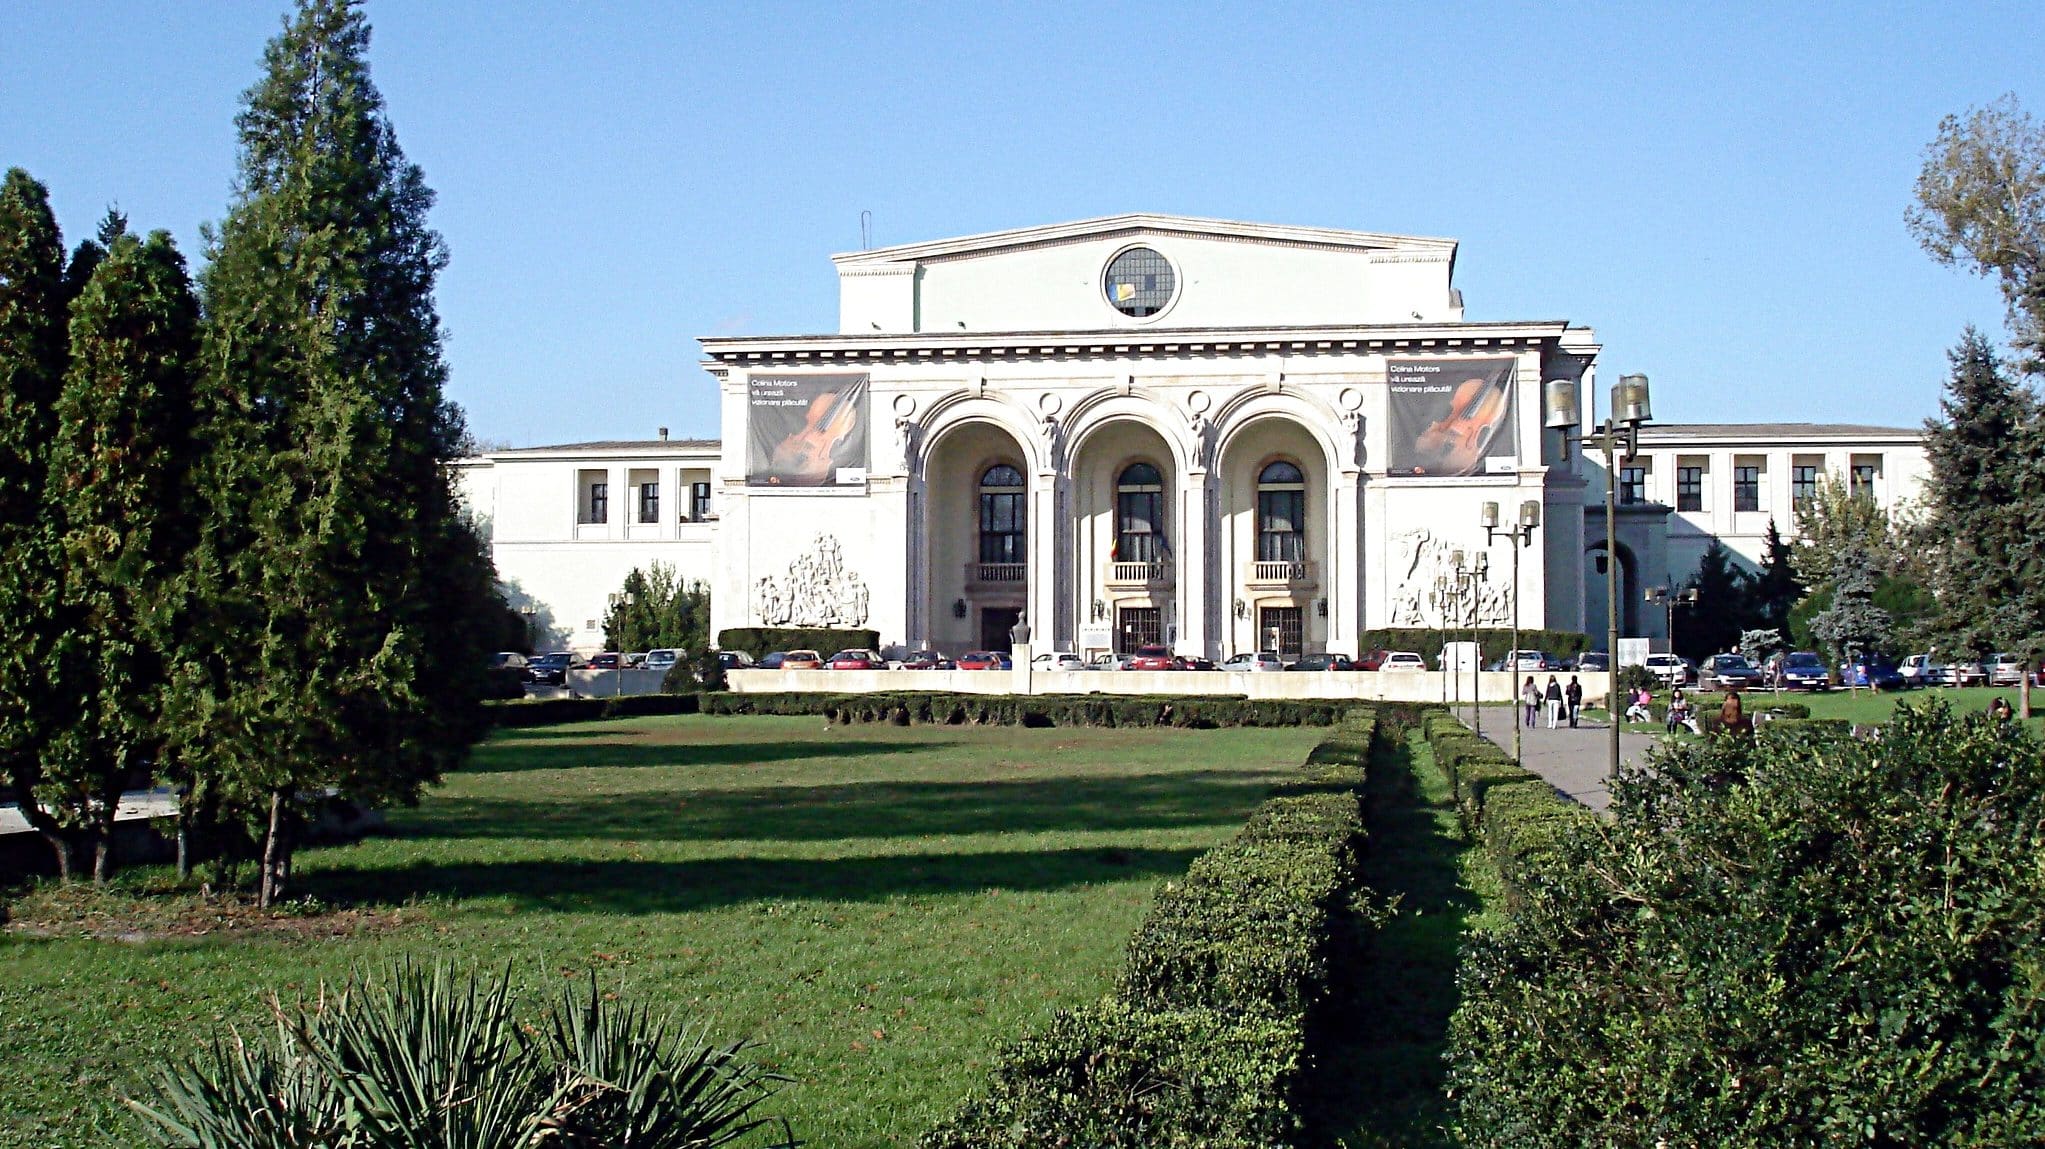 The National Opera of Bucharest is situated in Sector 5